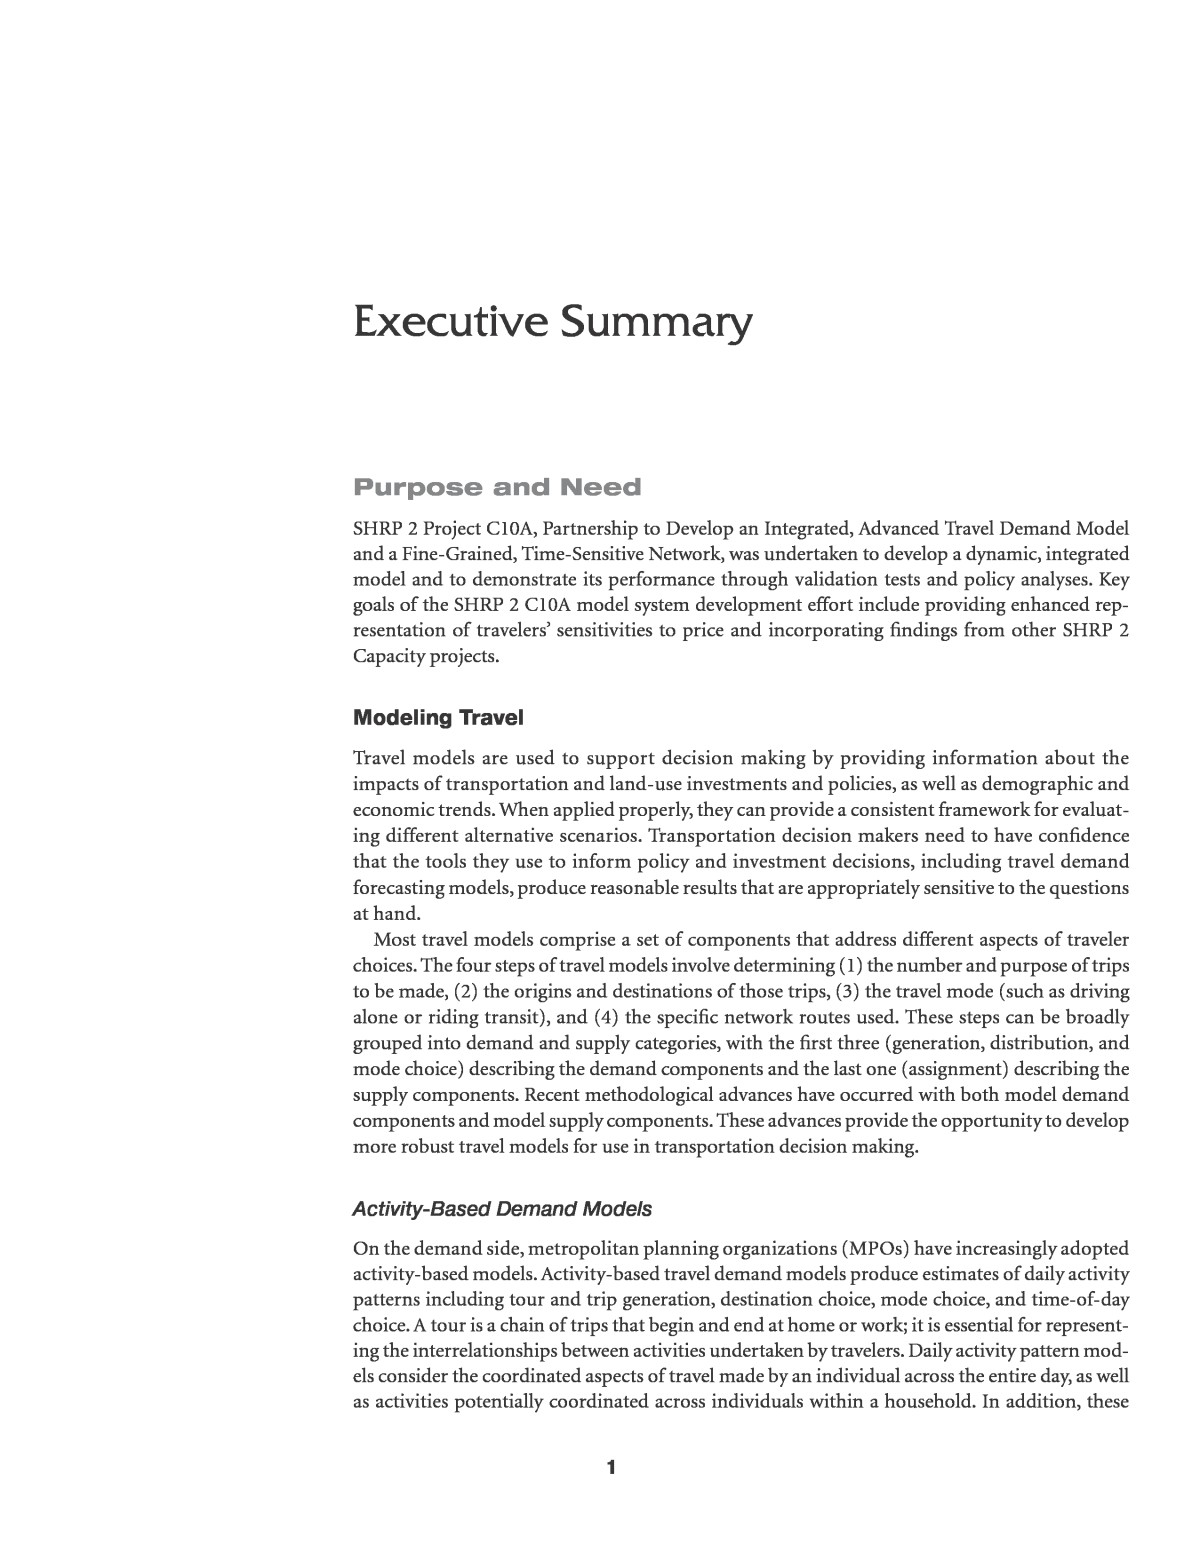 Executive Summary Template: What To Include